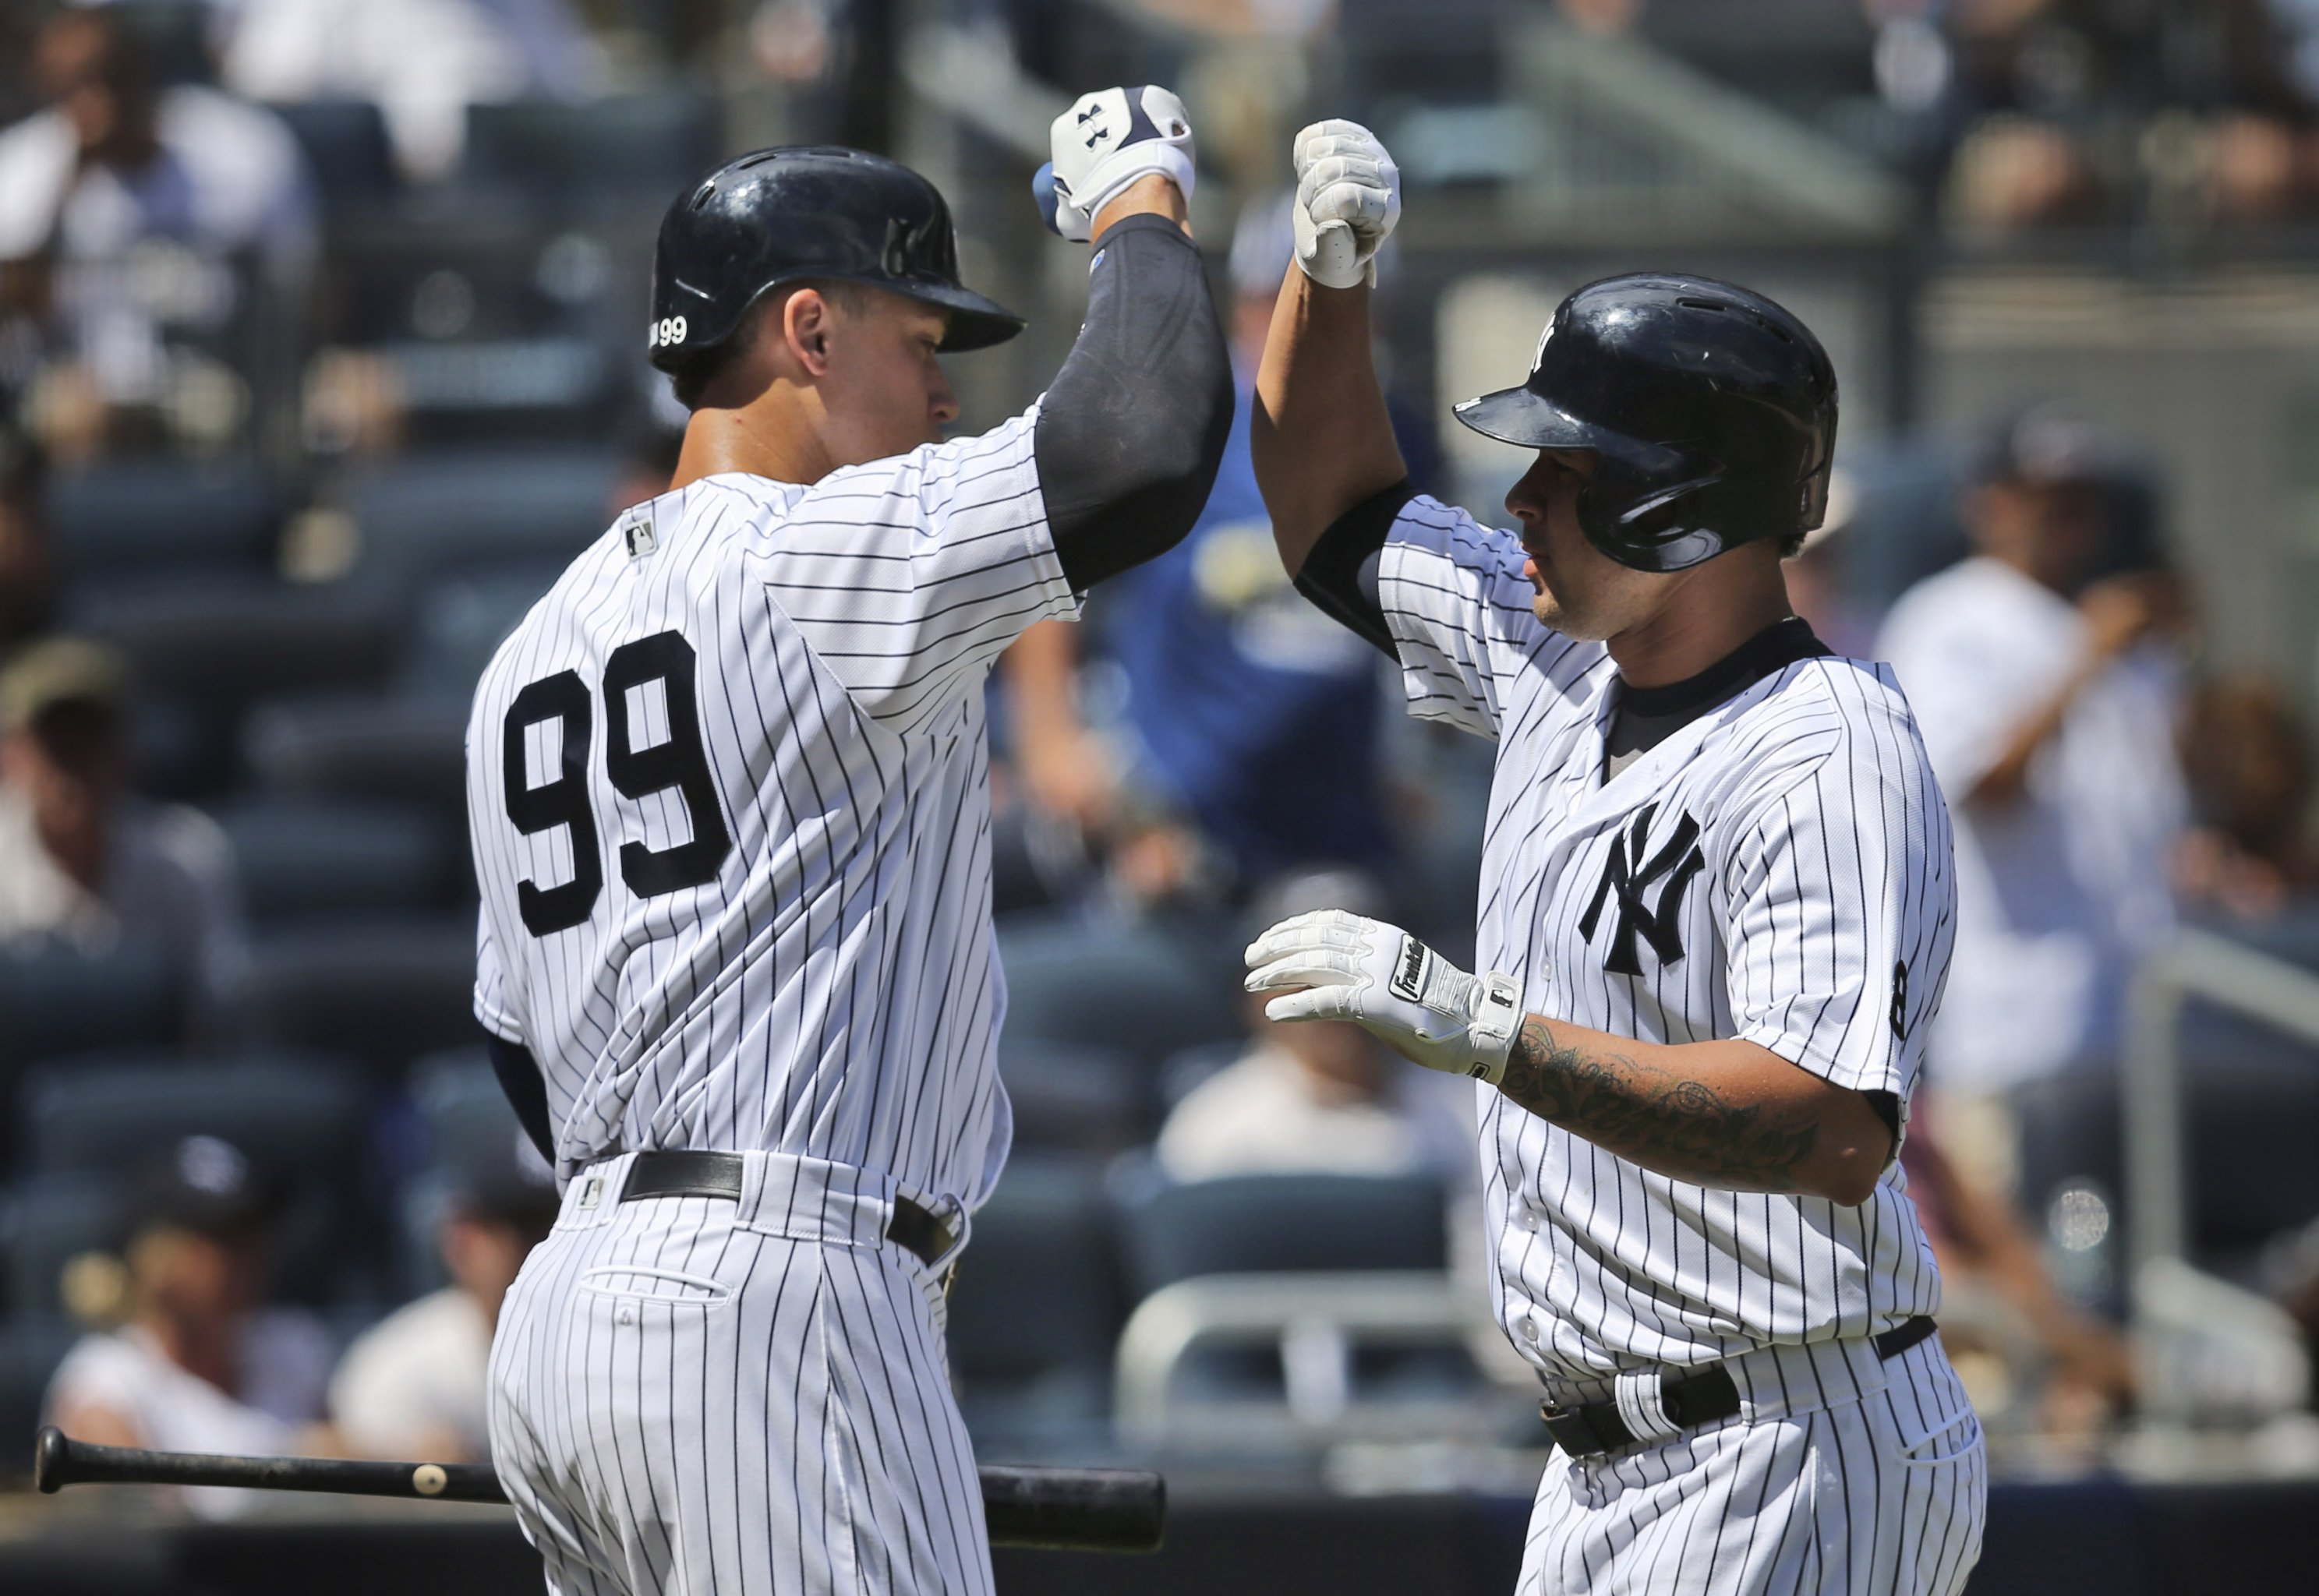 Miller: Yankees' Aaron Judge replaces Mike Trout for the moment as